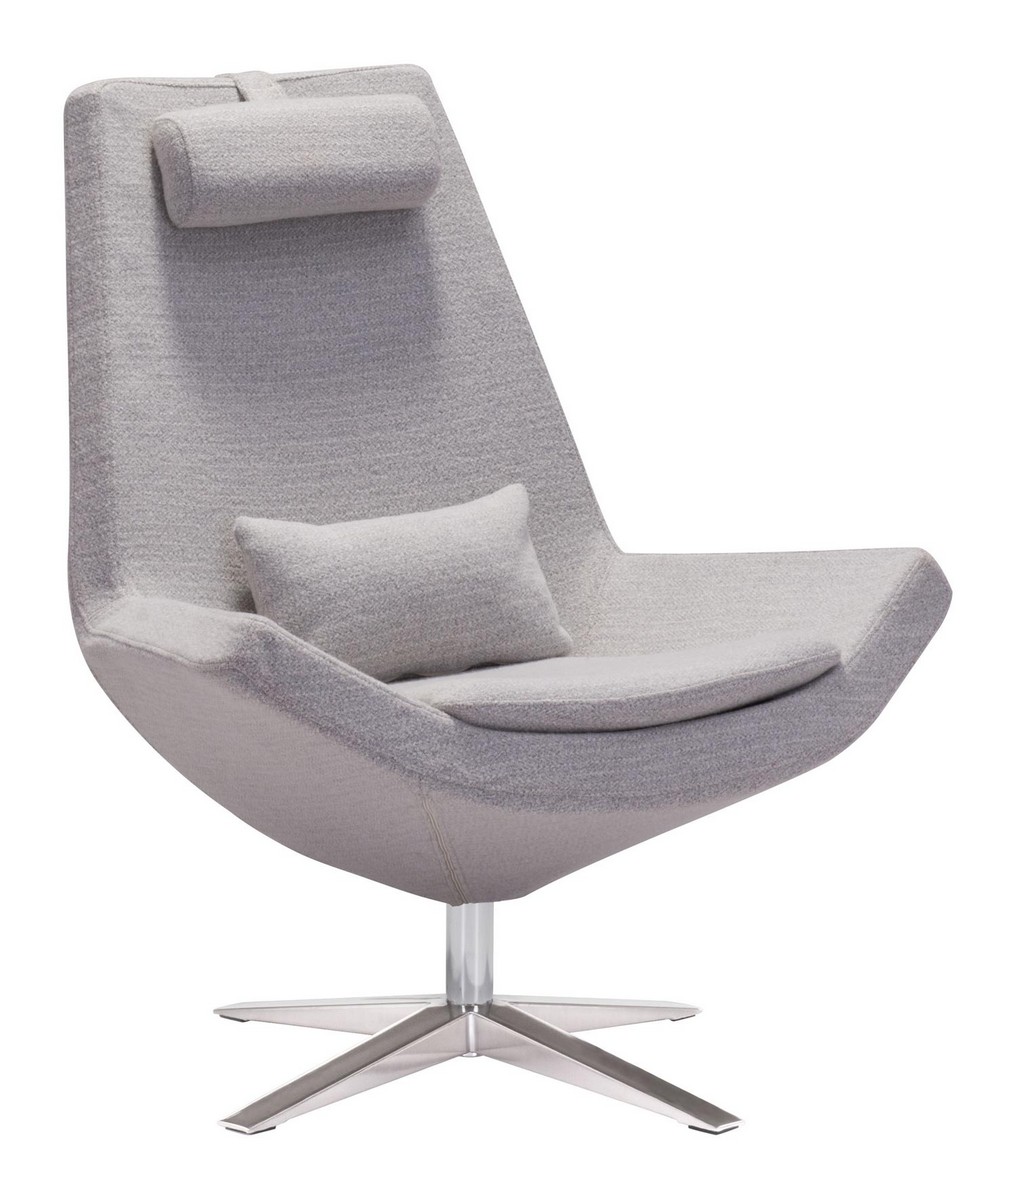 Zuo Modern Bruges Occasional Chair - Light Gray